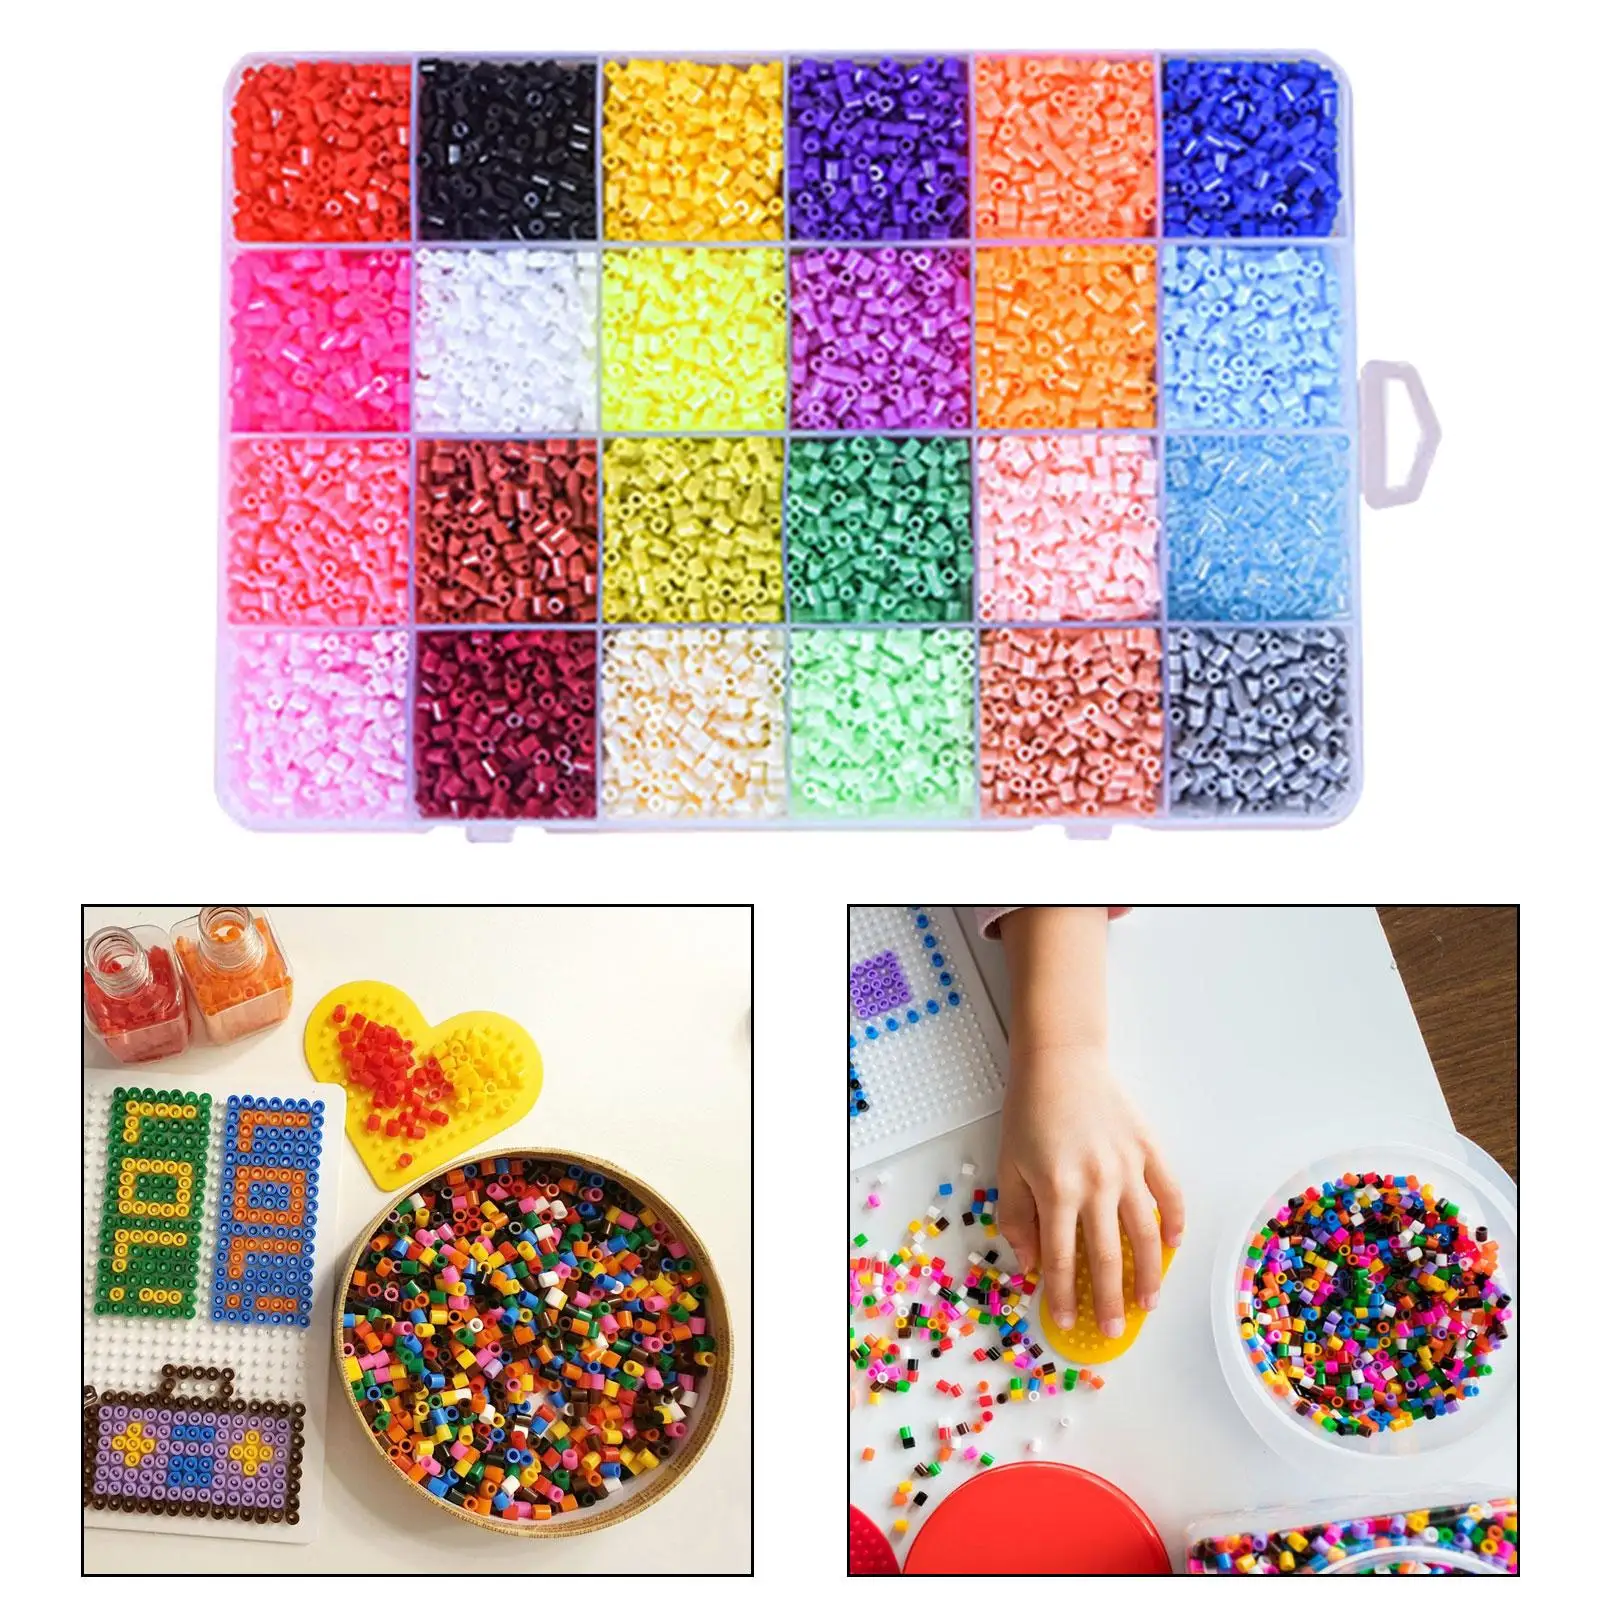 39000Pcs Fuse Beads Kit 2.6mm Art Crafts for Kids Holiday Children